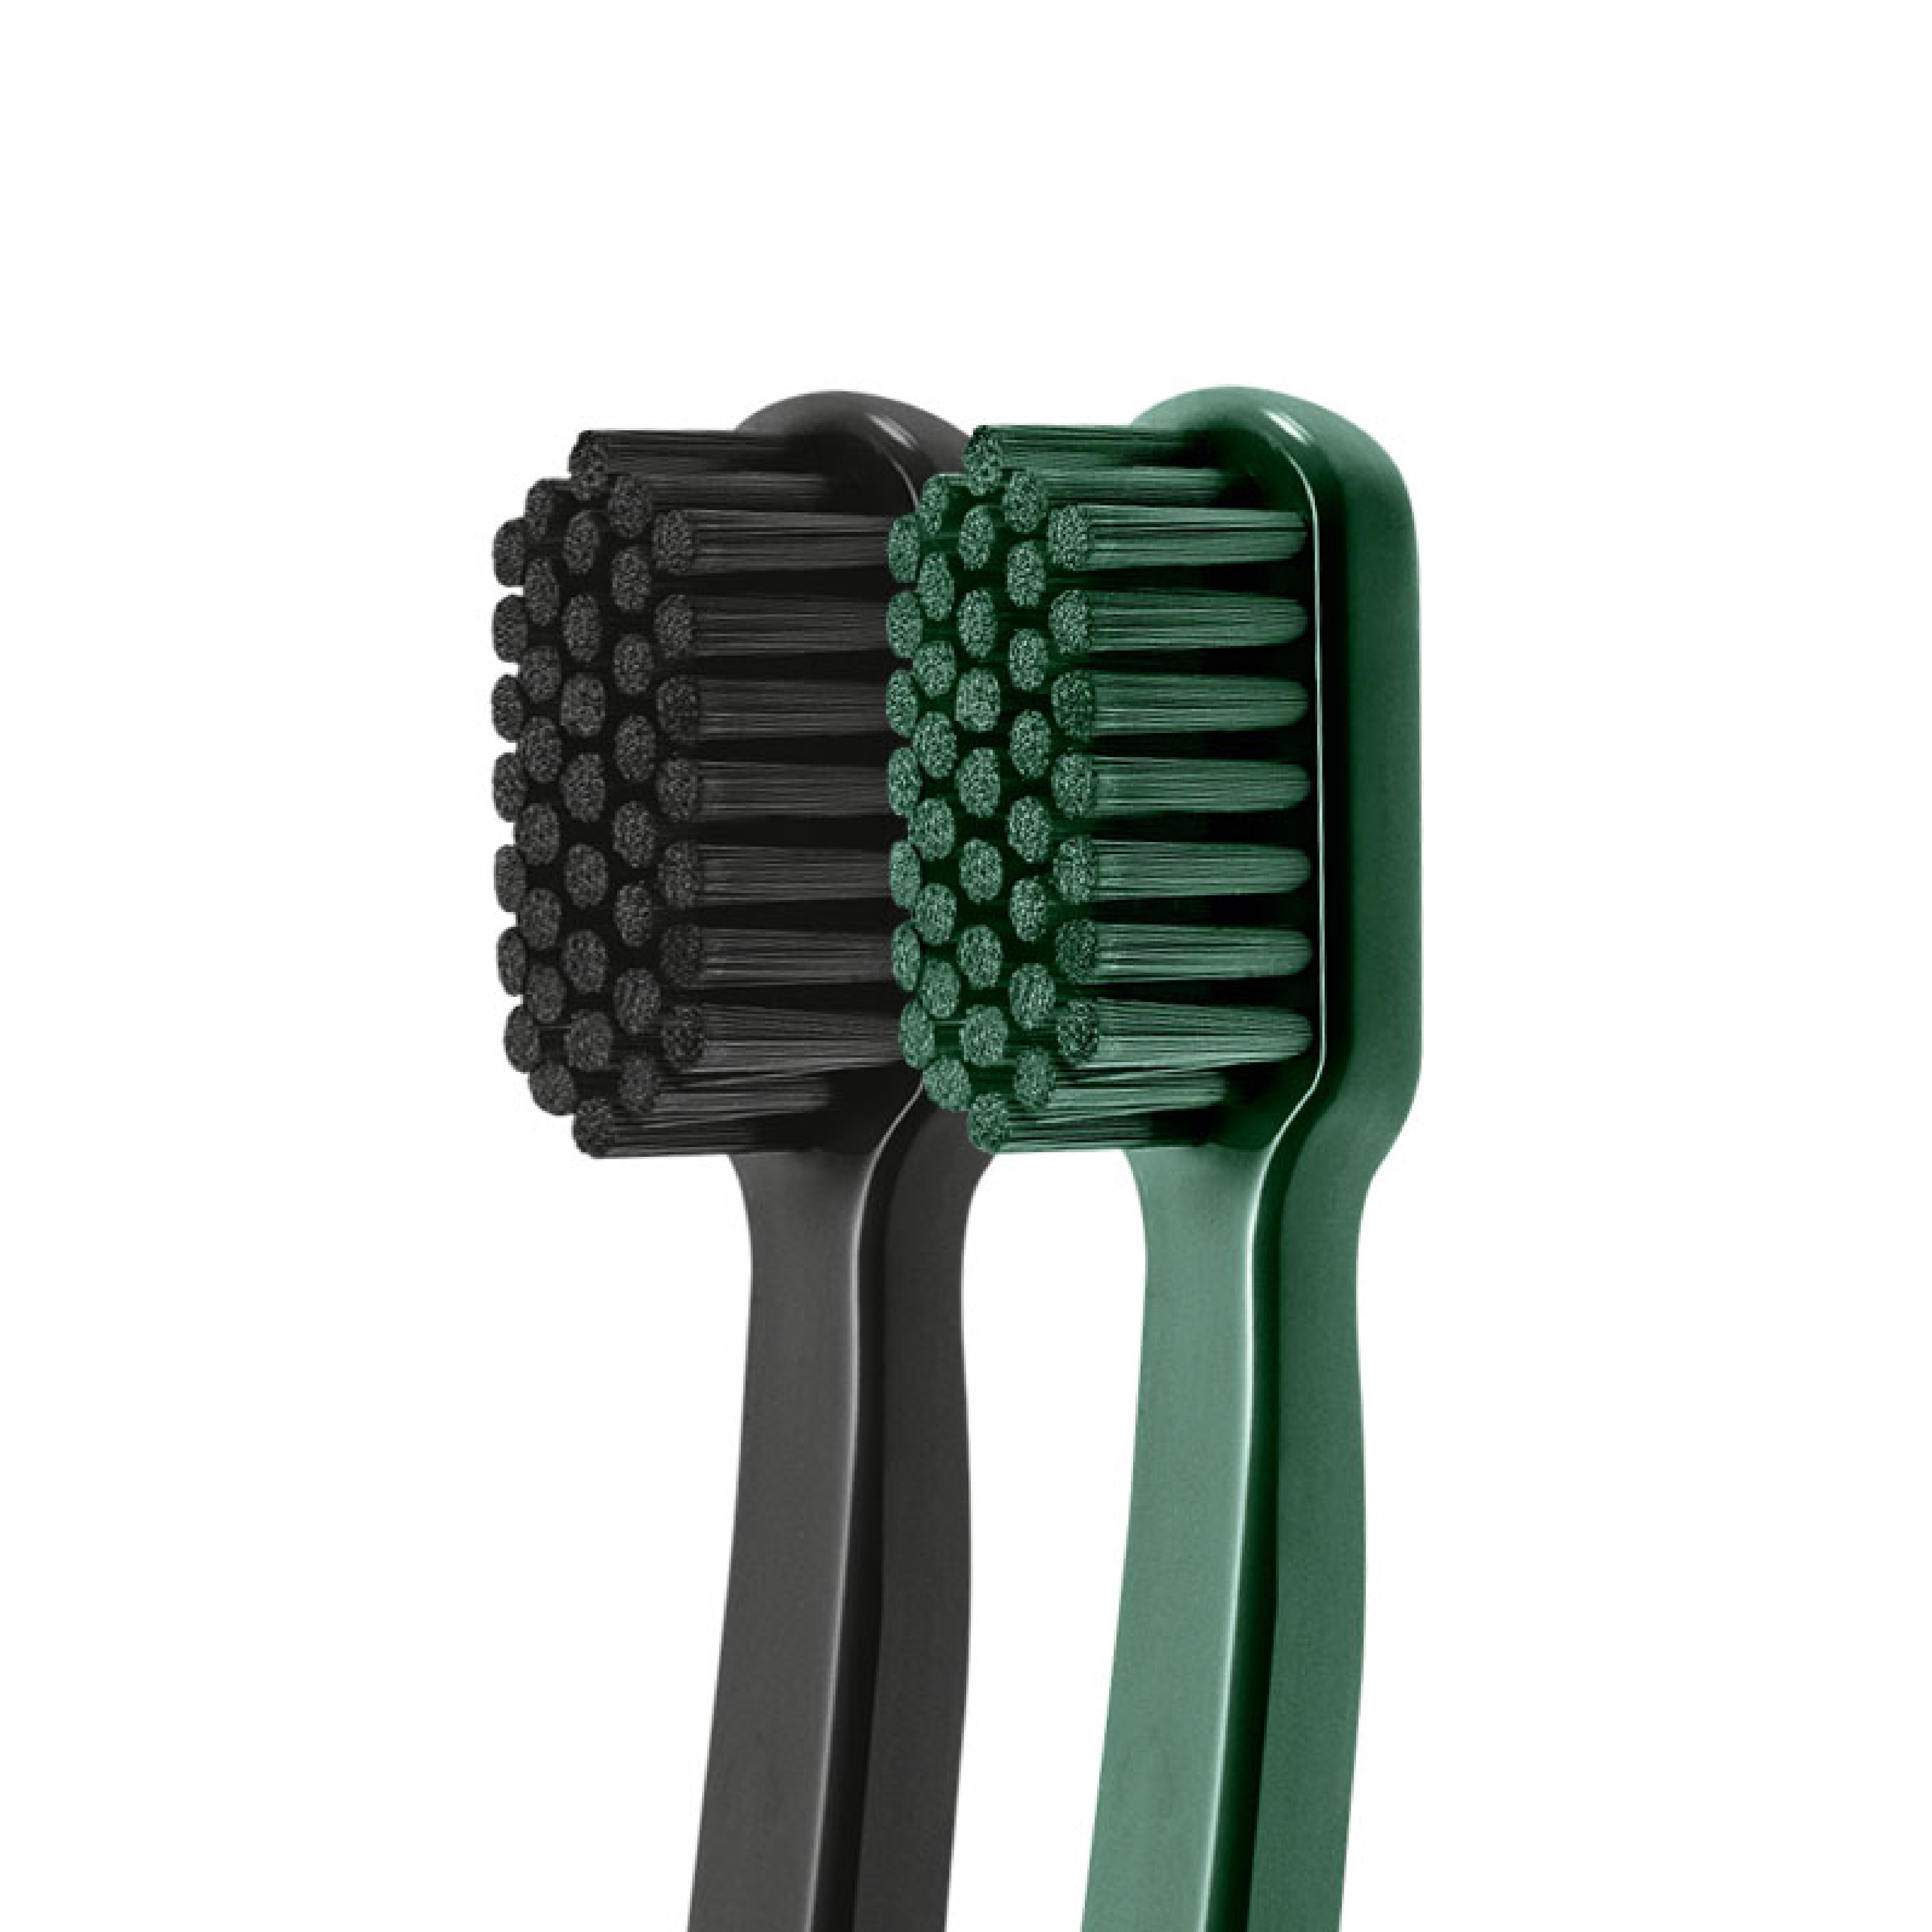 swiss smile professional toothbrushes in black and British racing green